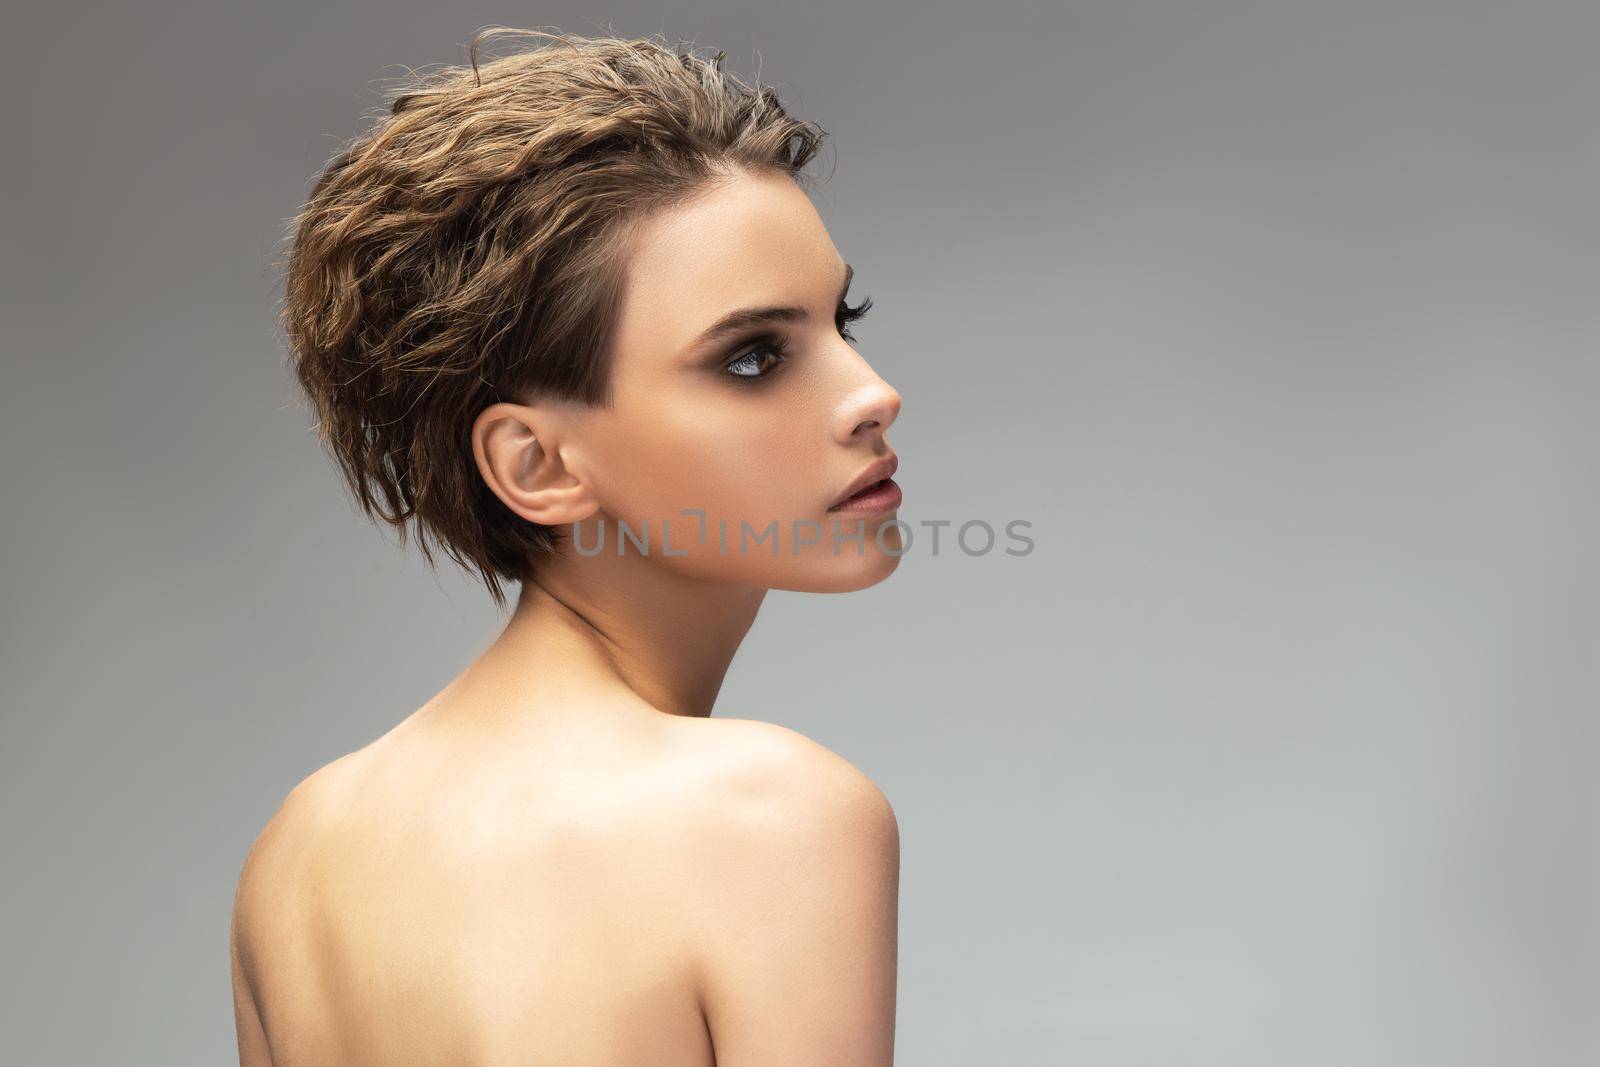 Glamorous portrait of young woman on gray background. Young sensual model girl pose in studio.